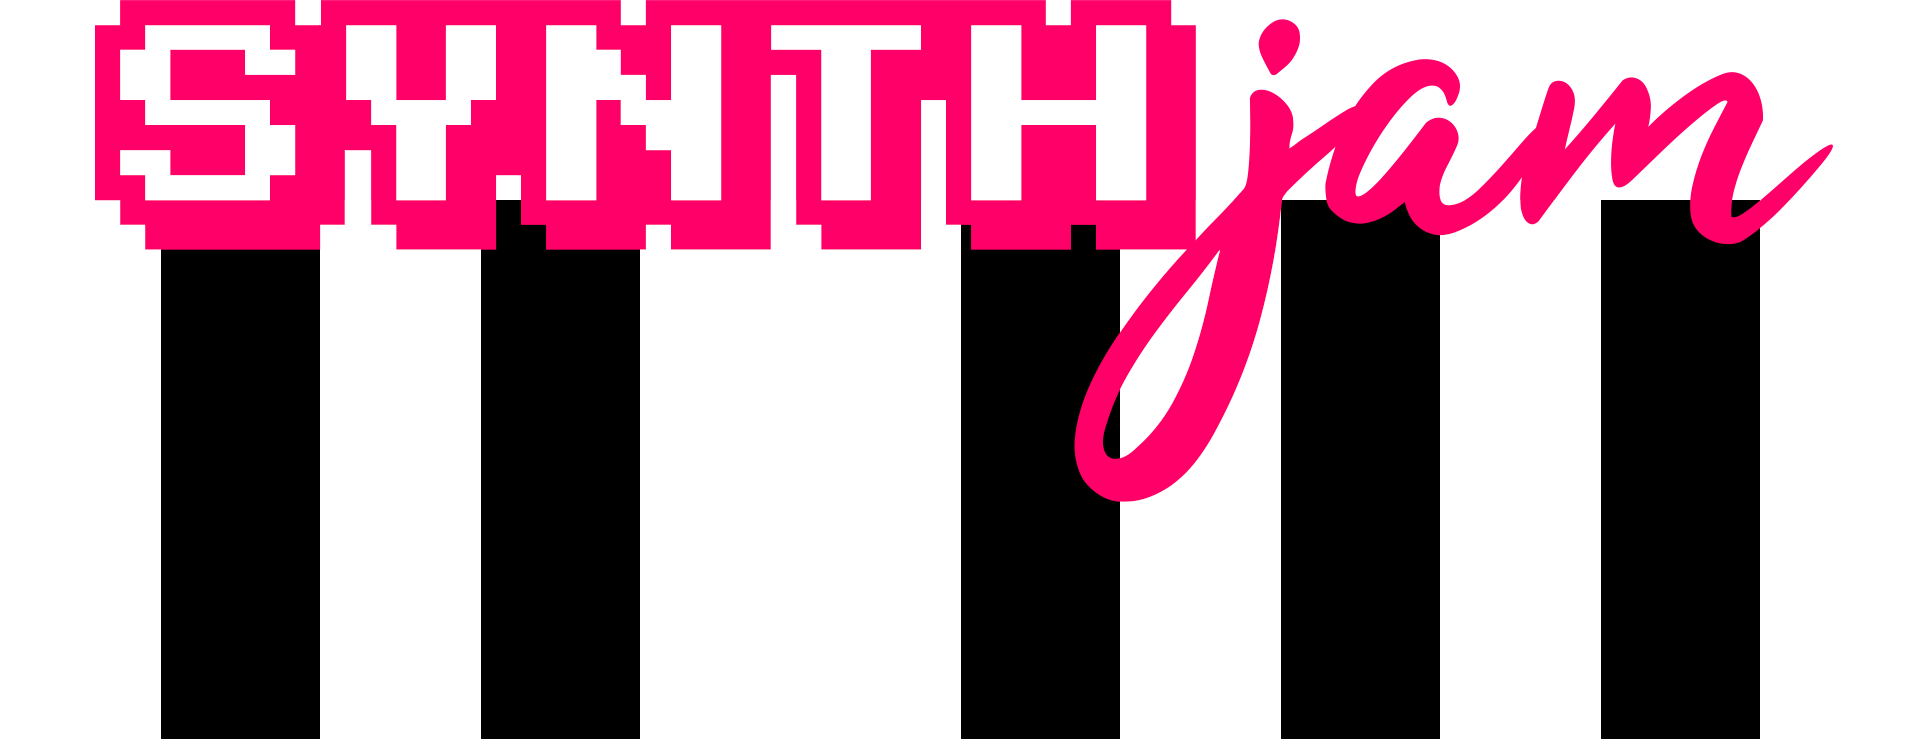 SYNTH jam logo, stylized retro text, superimposed over an abstract piano